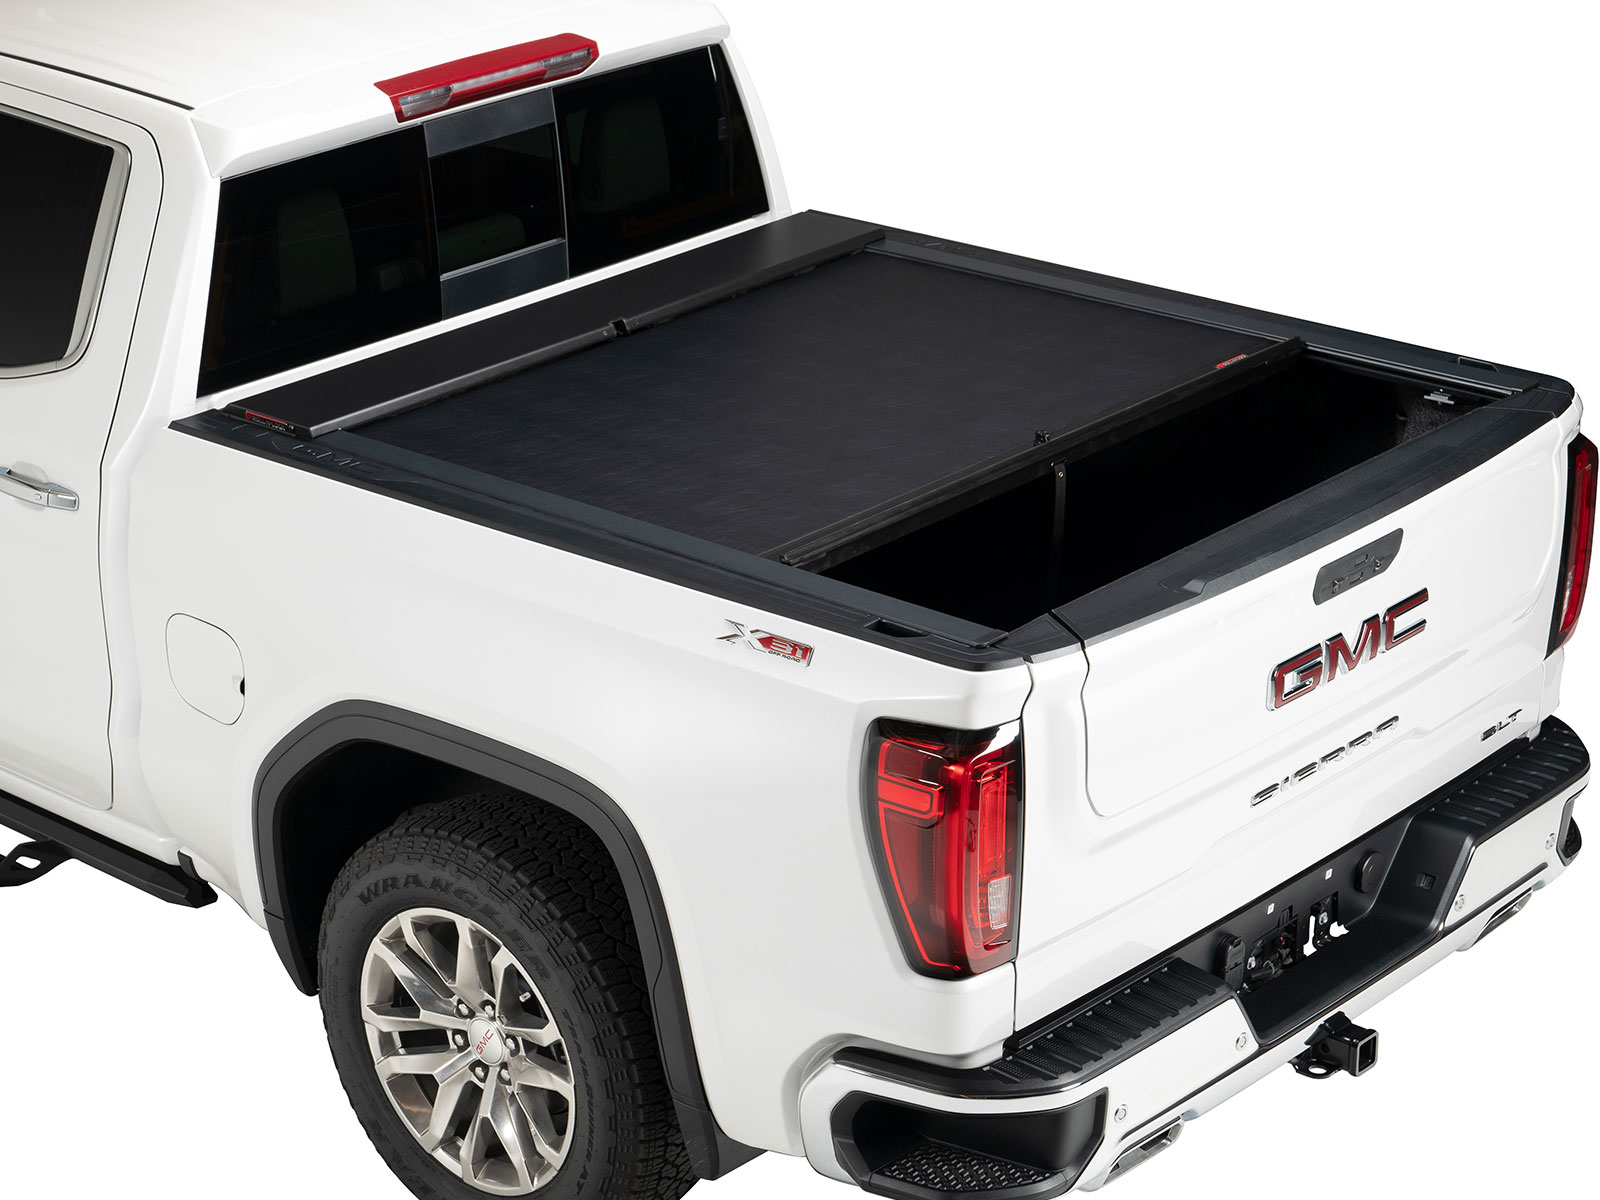 Nissan Frontier Bed Covers & Tonneau Covers | RealTruck